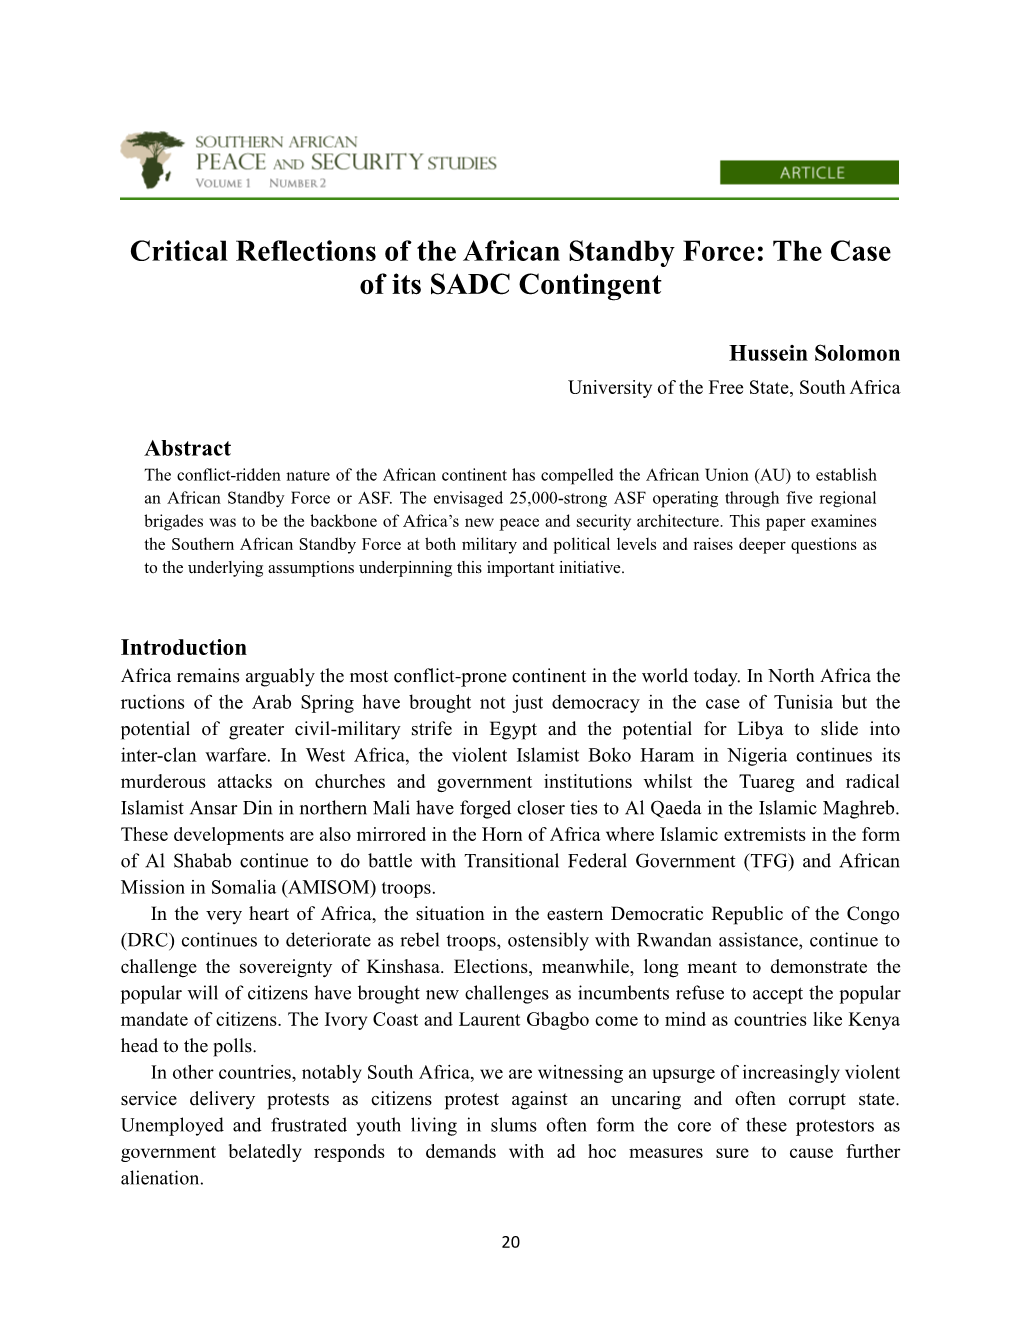 Critical Reflections of the African Standby Force: the Case of Its SADC Contingent